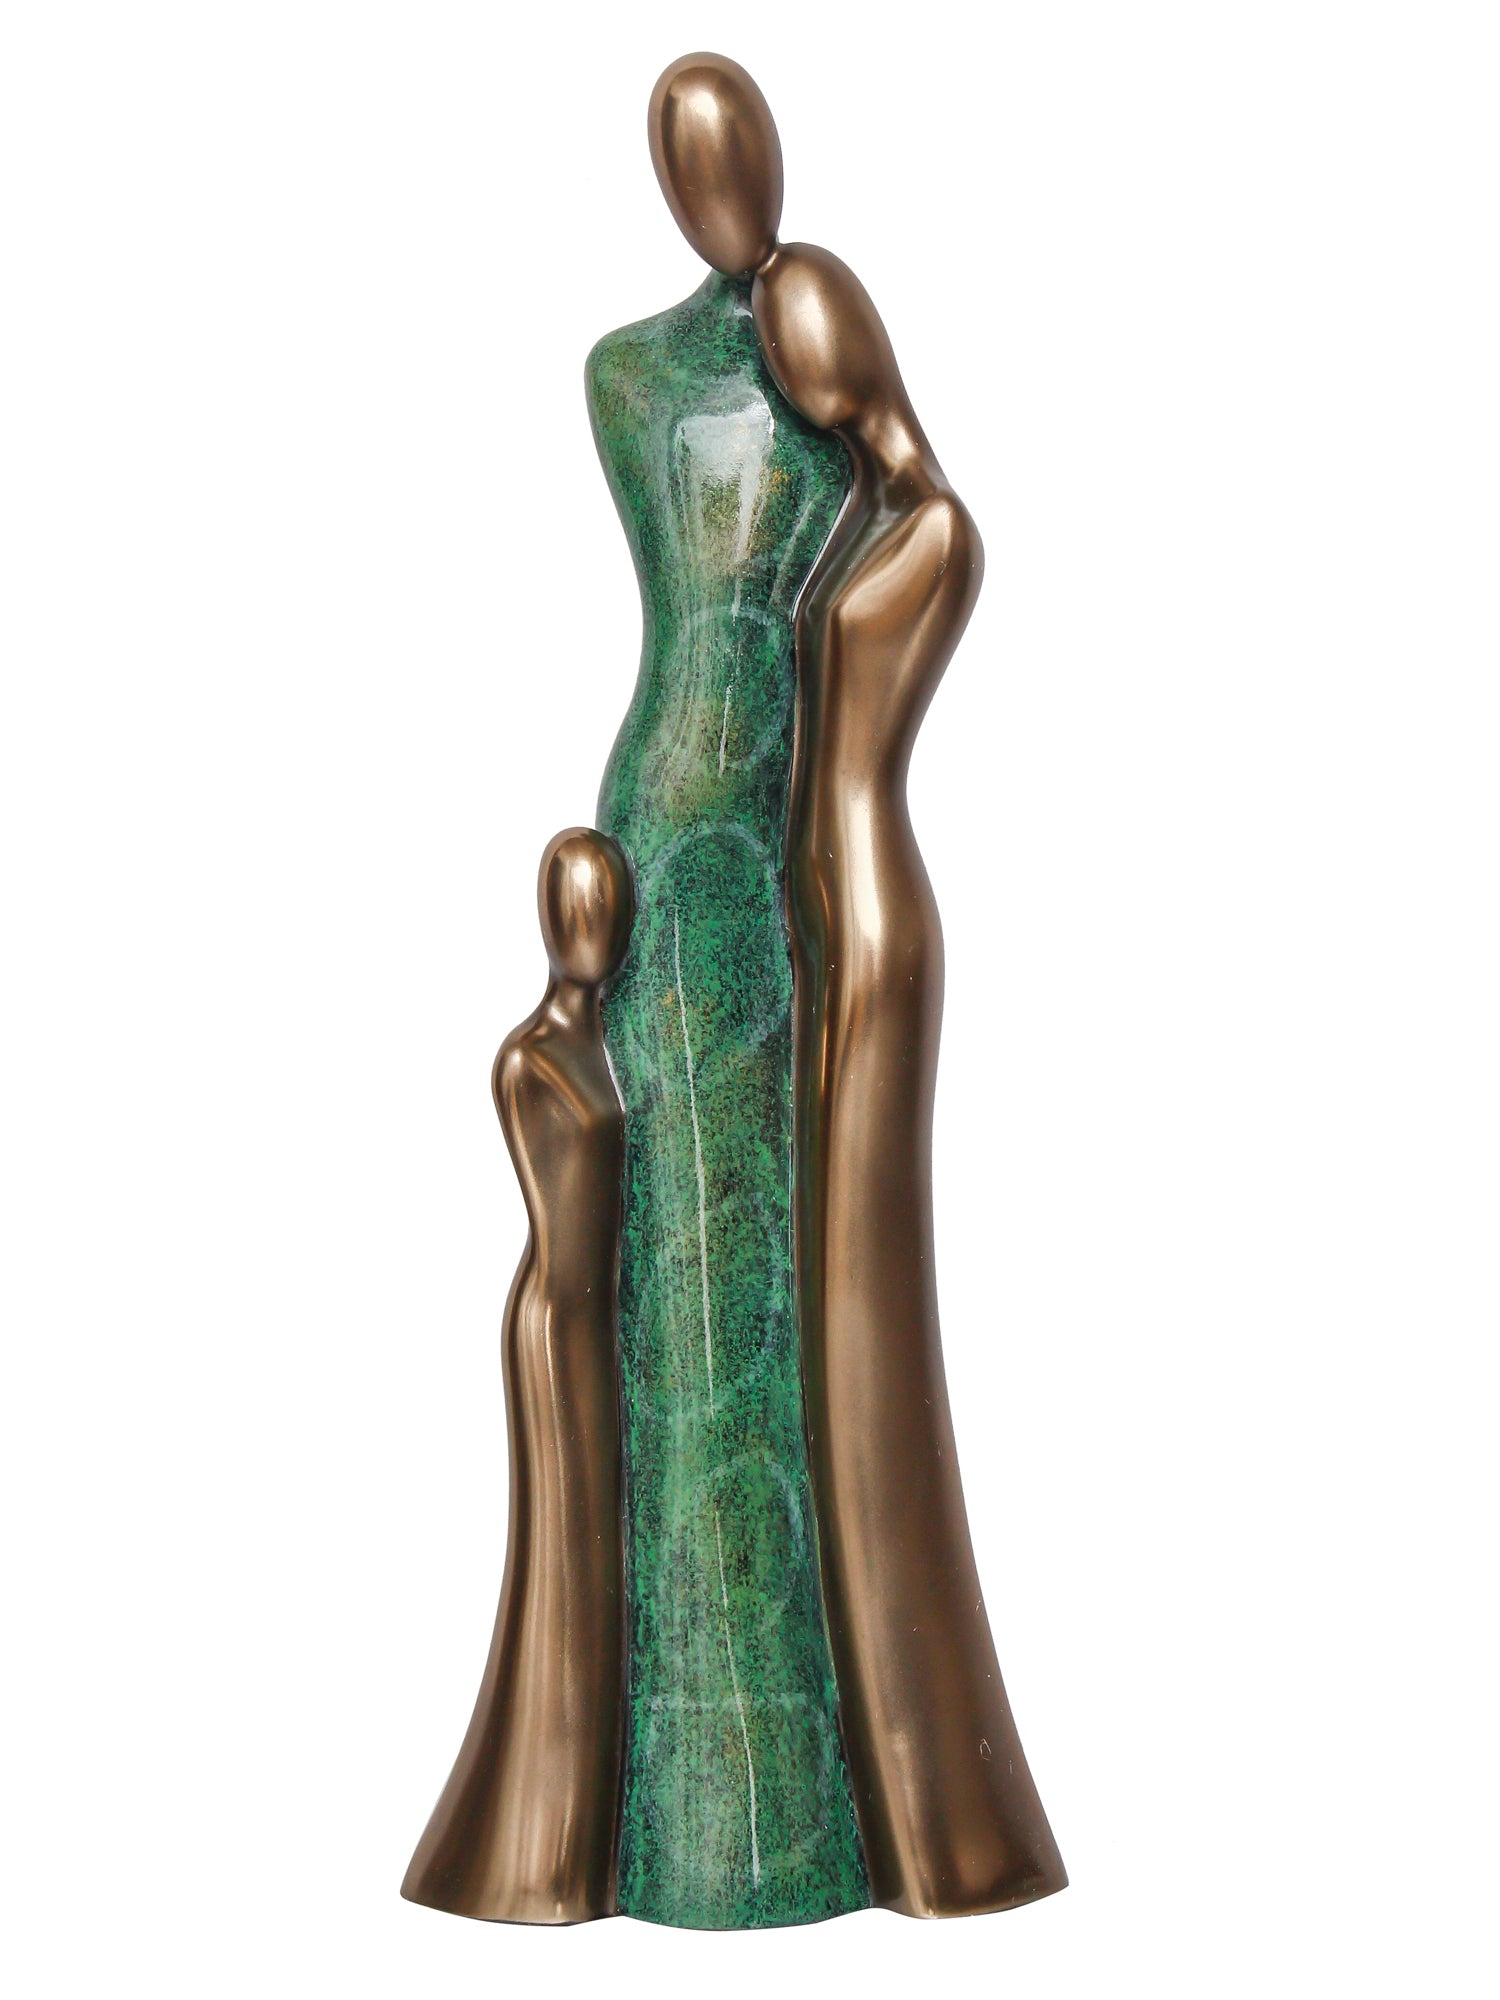 Polyresin and Bronze Family of Mother, Daughter and Grand Daughter Human Figurine Decorative Showpiece (Green and Brown) 2